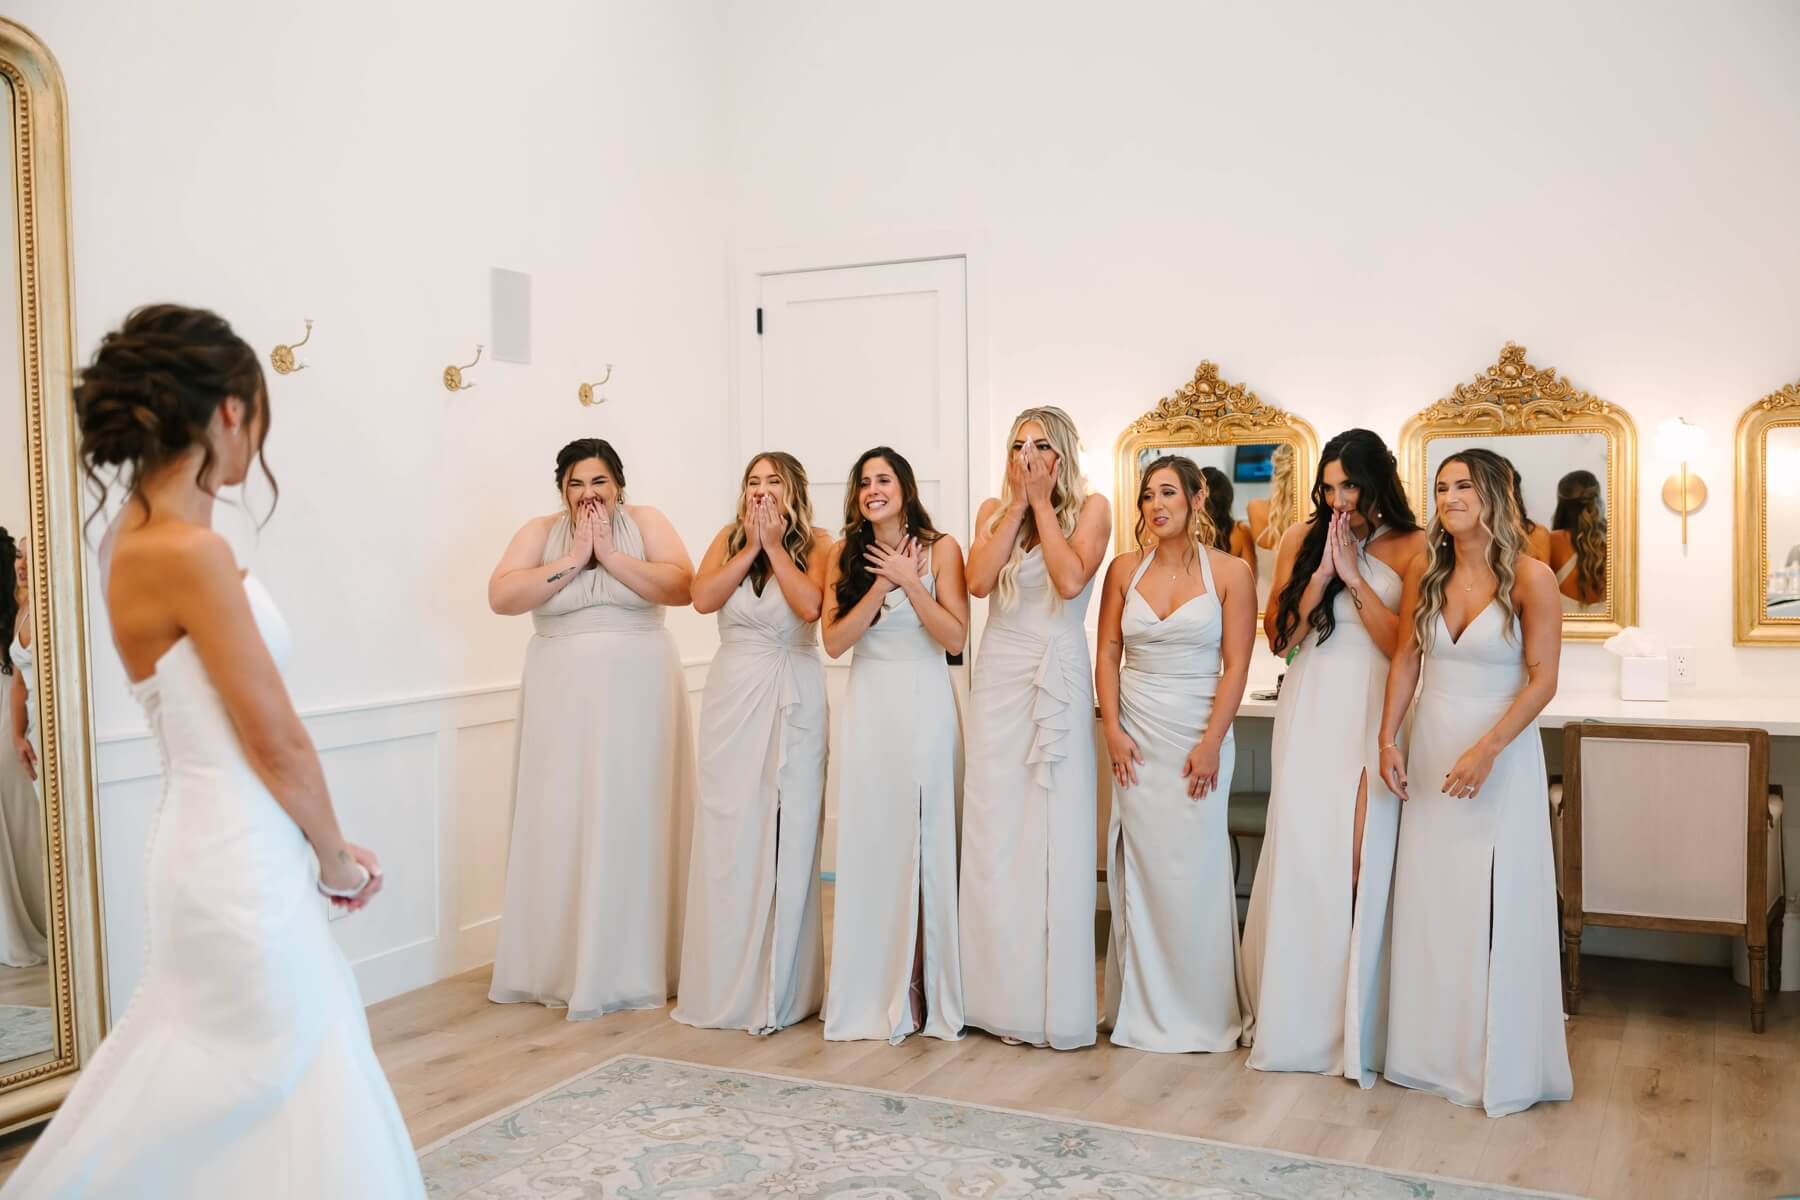 Bridesmaids reacting to seeing bride for the first time